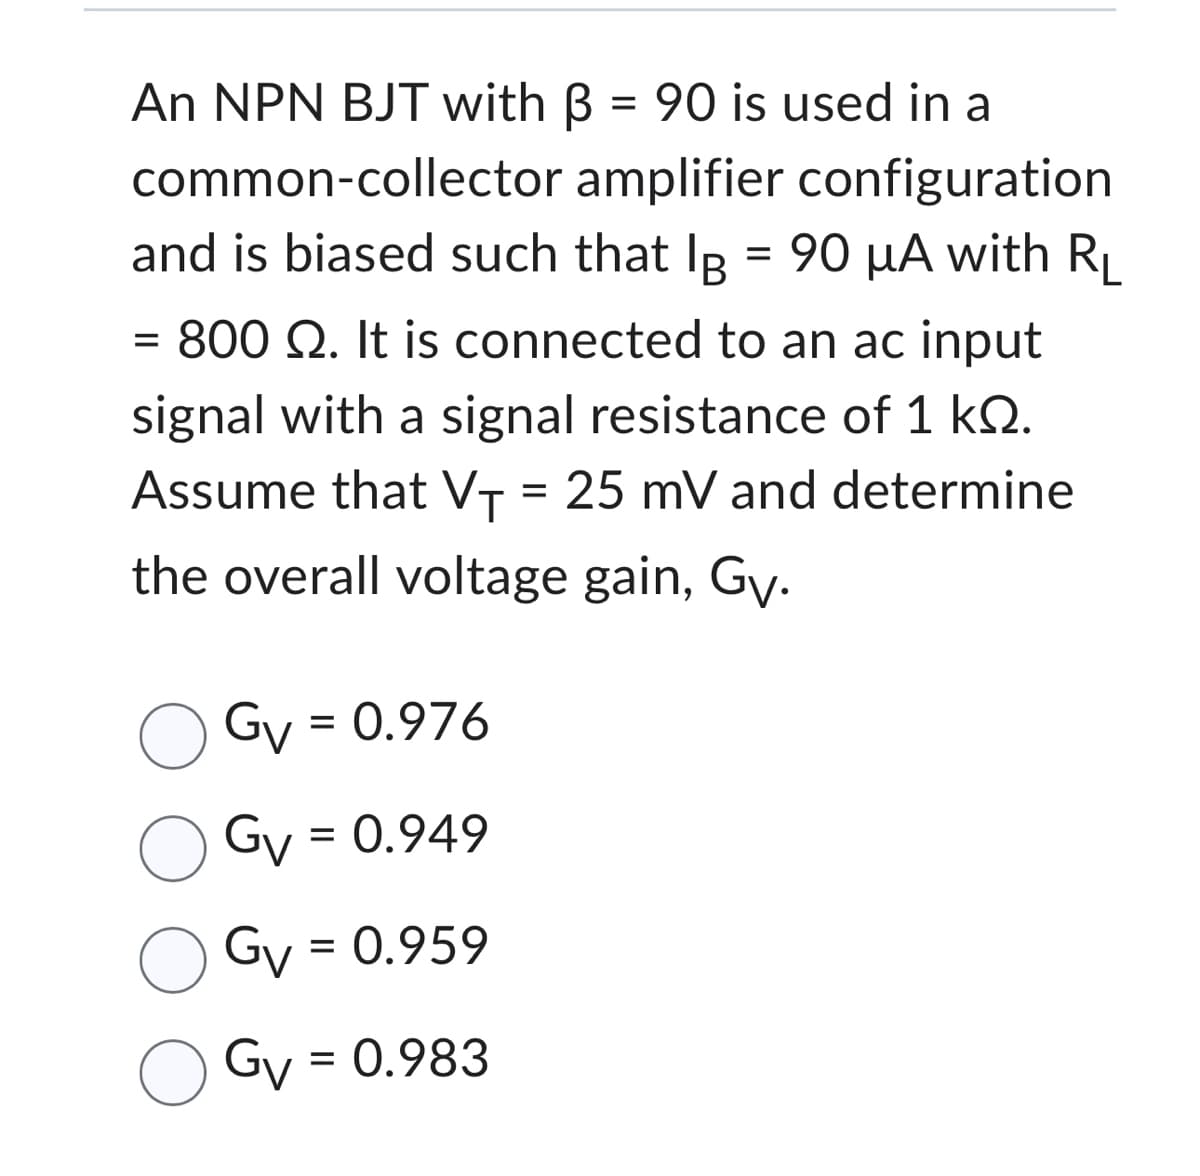 An NPN BJT with B = 90 is used in a
common-collector amplifier configuration
and is biased such that IB = 90 μA with RL
= 800 Q2. It is connected to an ac input
signal with a signal resistance of 1 k.
Assume that V₁ = 25 mV and determine
the overall voltage gain, Gy.
Gv = 0.976
OGv = 0.949
Gv = 0.959
Gv = 0.983